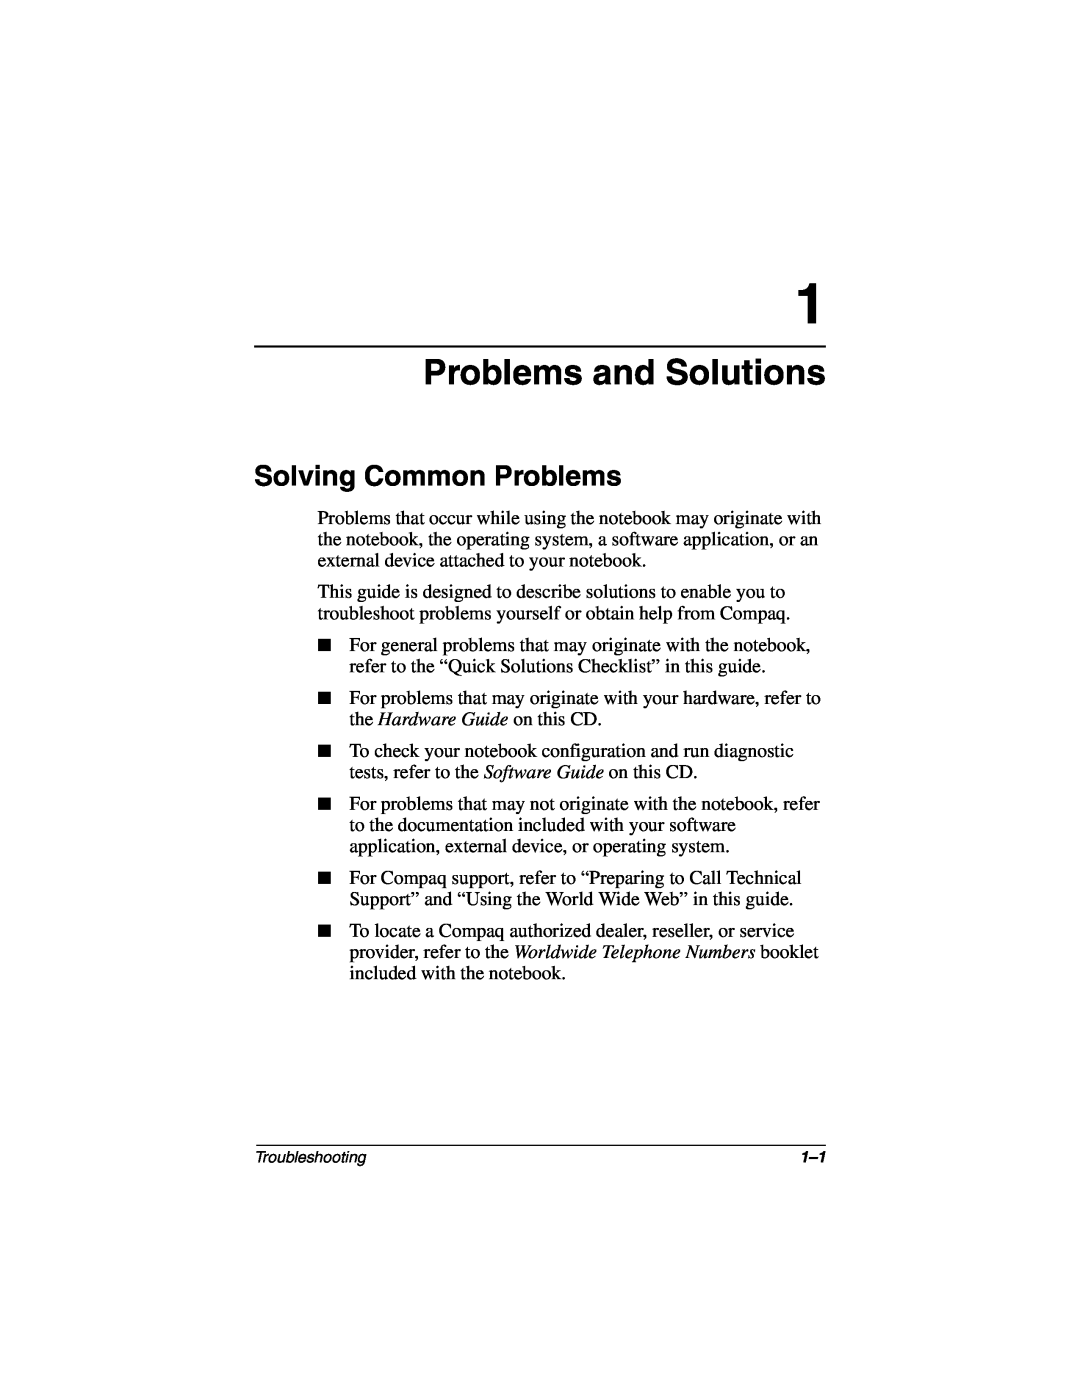 DeWalt 267644-001 manual Problems and Solutions, Solving Common Problems 